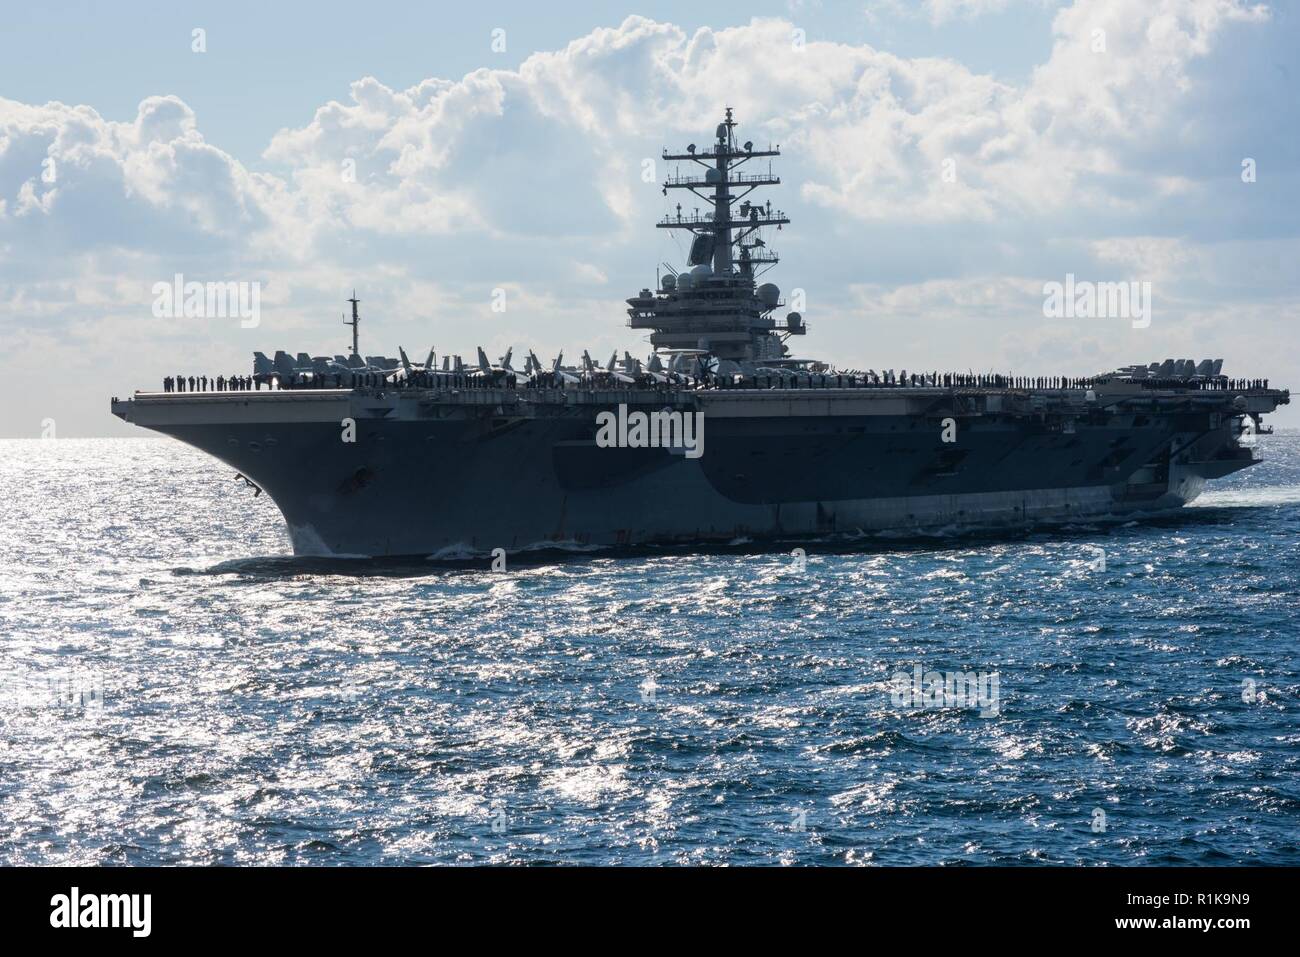 JEJU ISLAND, Republic of Korea, Republic of Korea (Oct. 11, 2018) The nuclear-powered aircraft carrier USS Ronald Reagan (CVN 76) participates in a pass-in-review during the Republic of Korea (ROK) 2018 International Fleet Review (IFR). The IFR is conducted every 10 years and has participants and observers from more than 20 foreign navies. Stock Photo